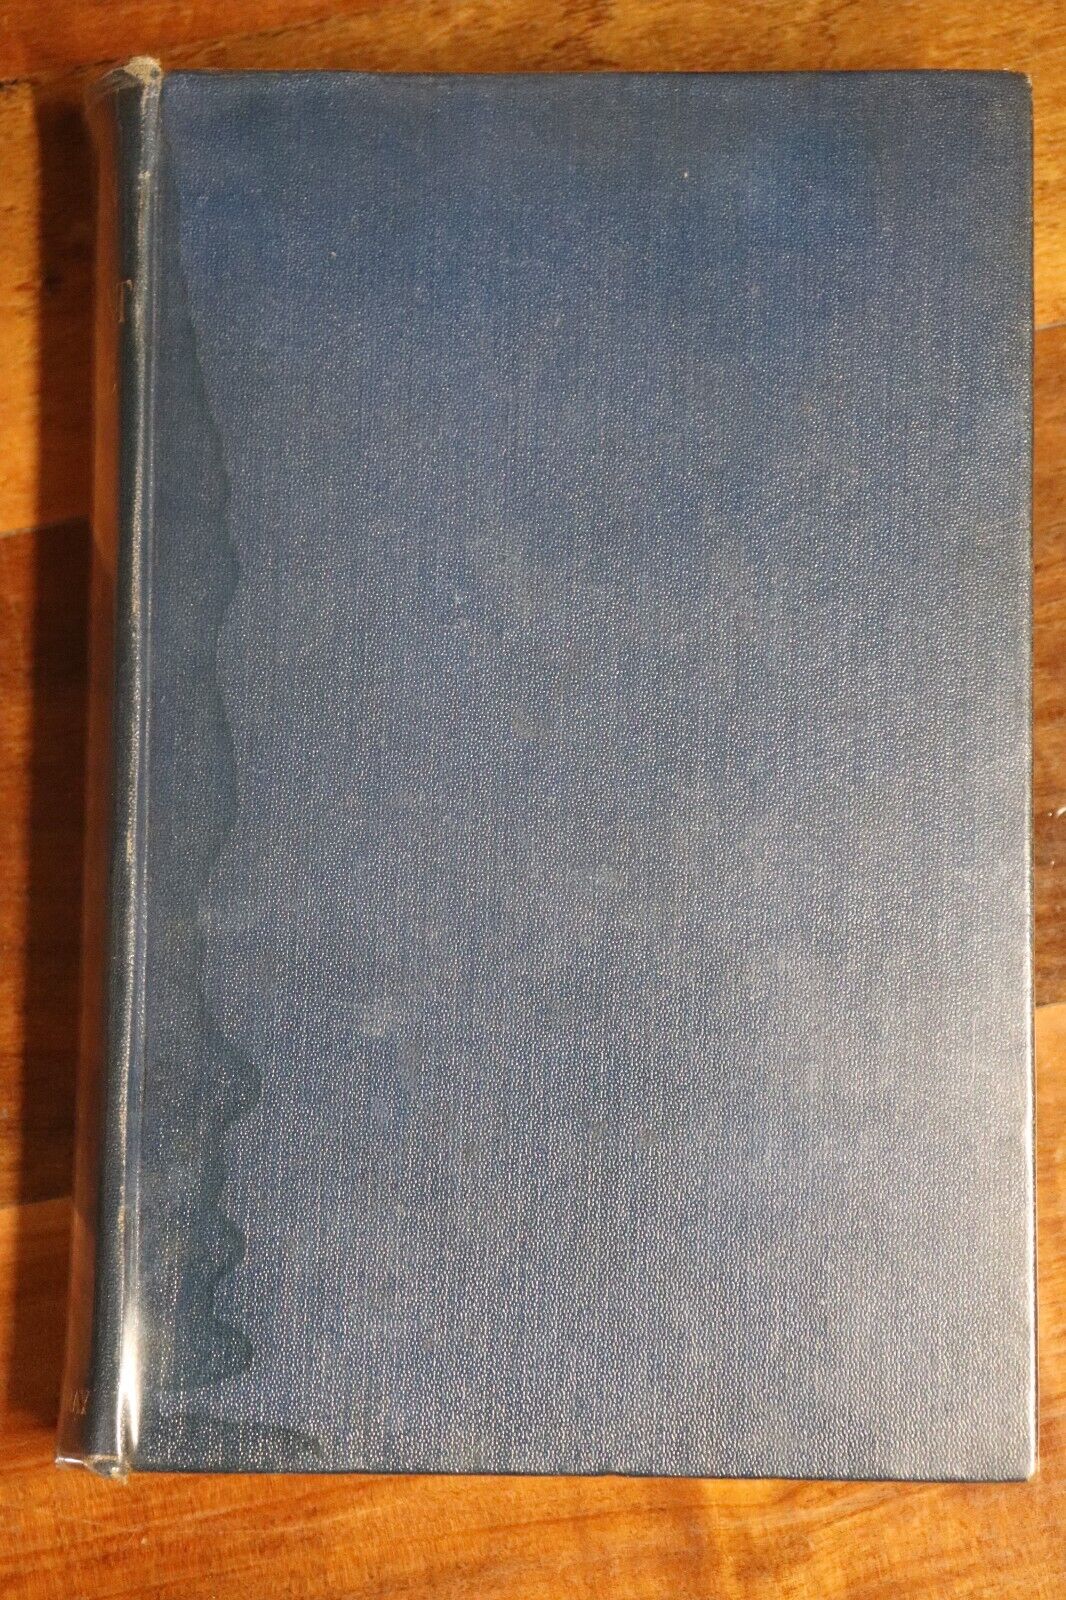 The Men Of The Merchant Service by FT Bullen - 1900 - Antique Navy Military Book